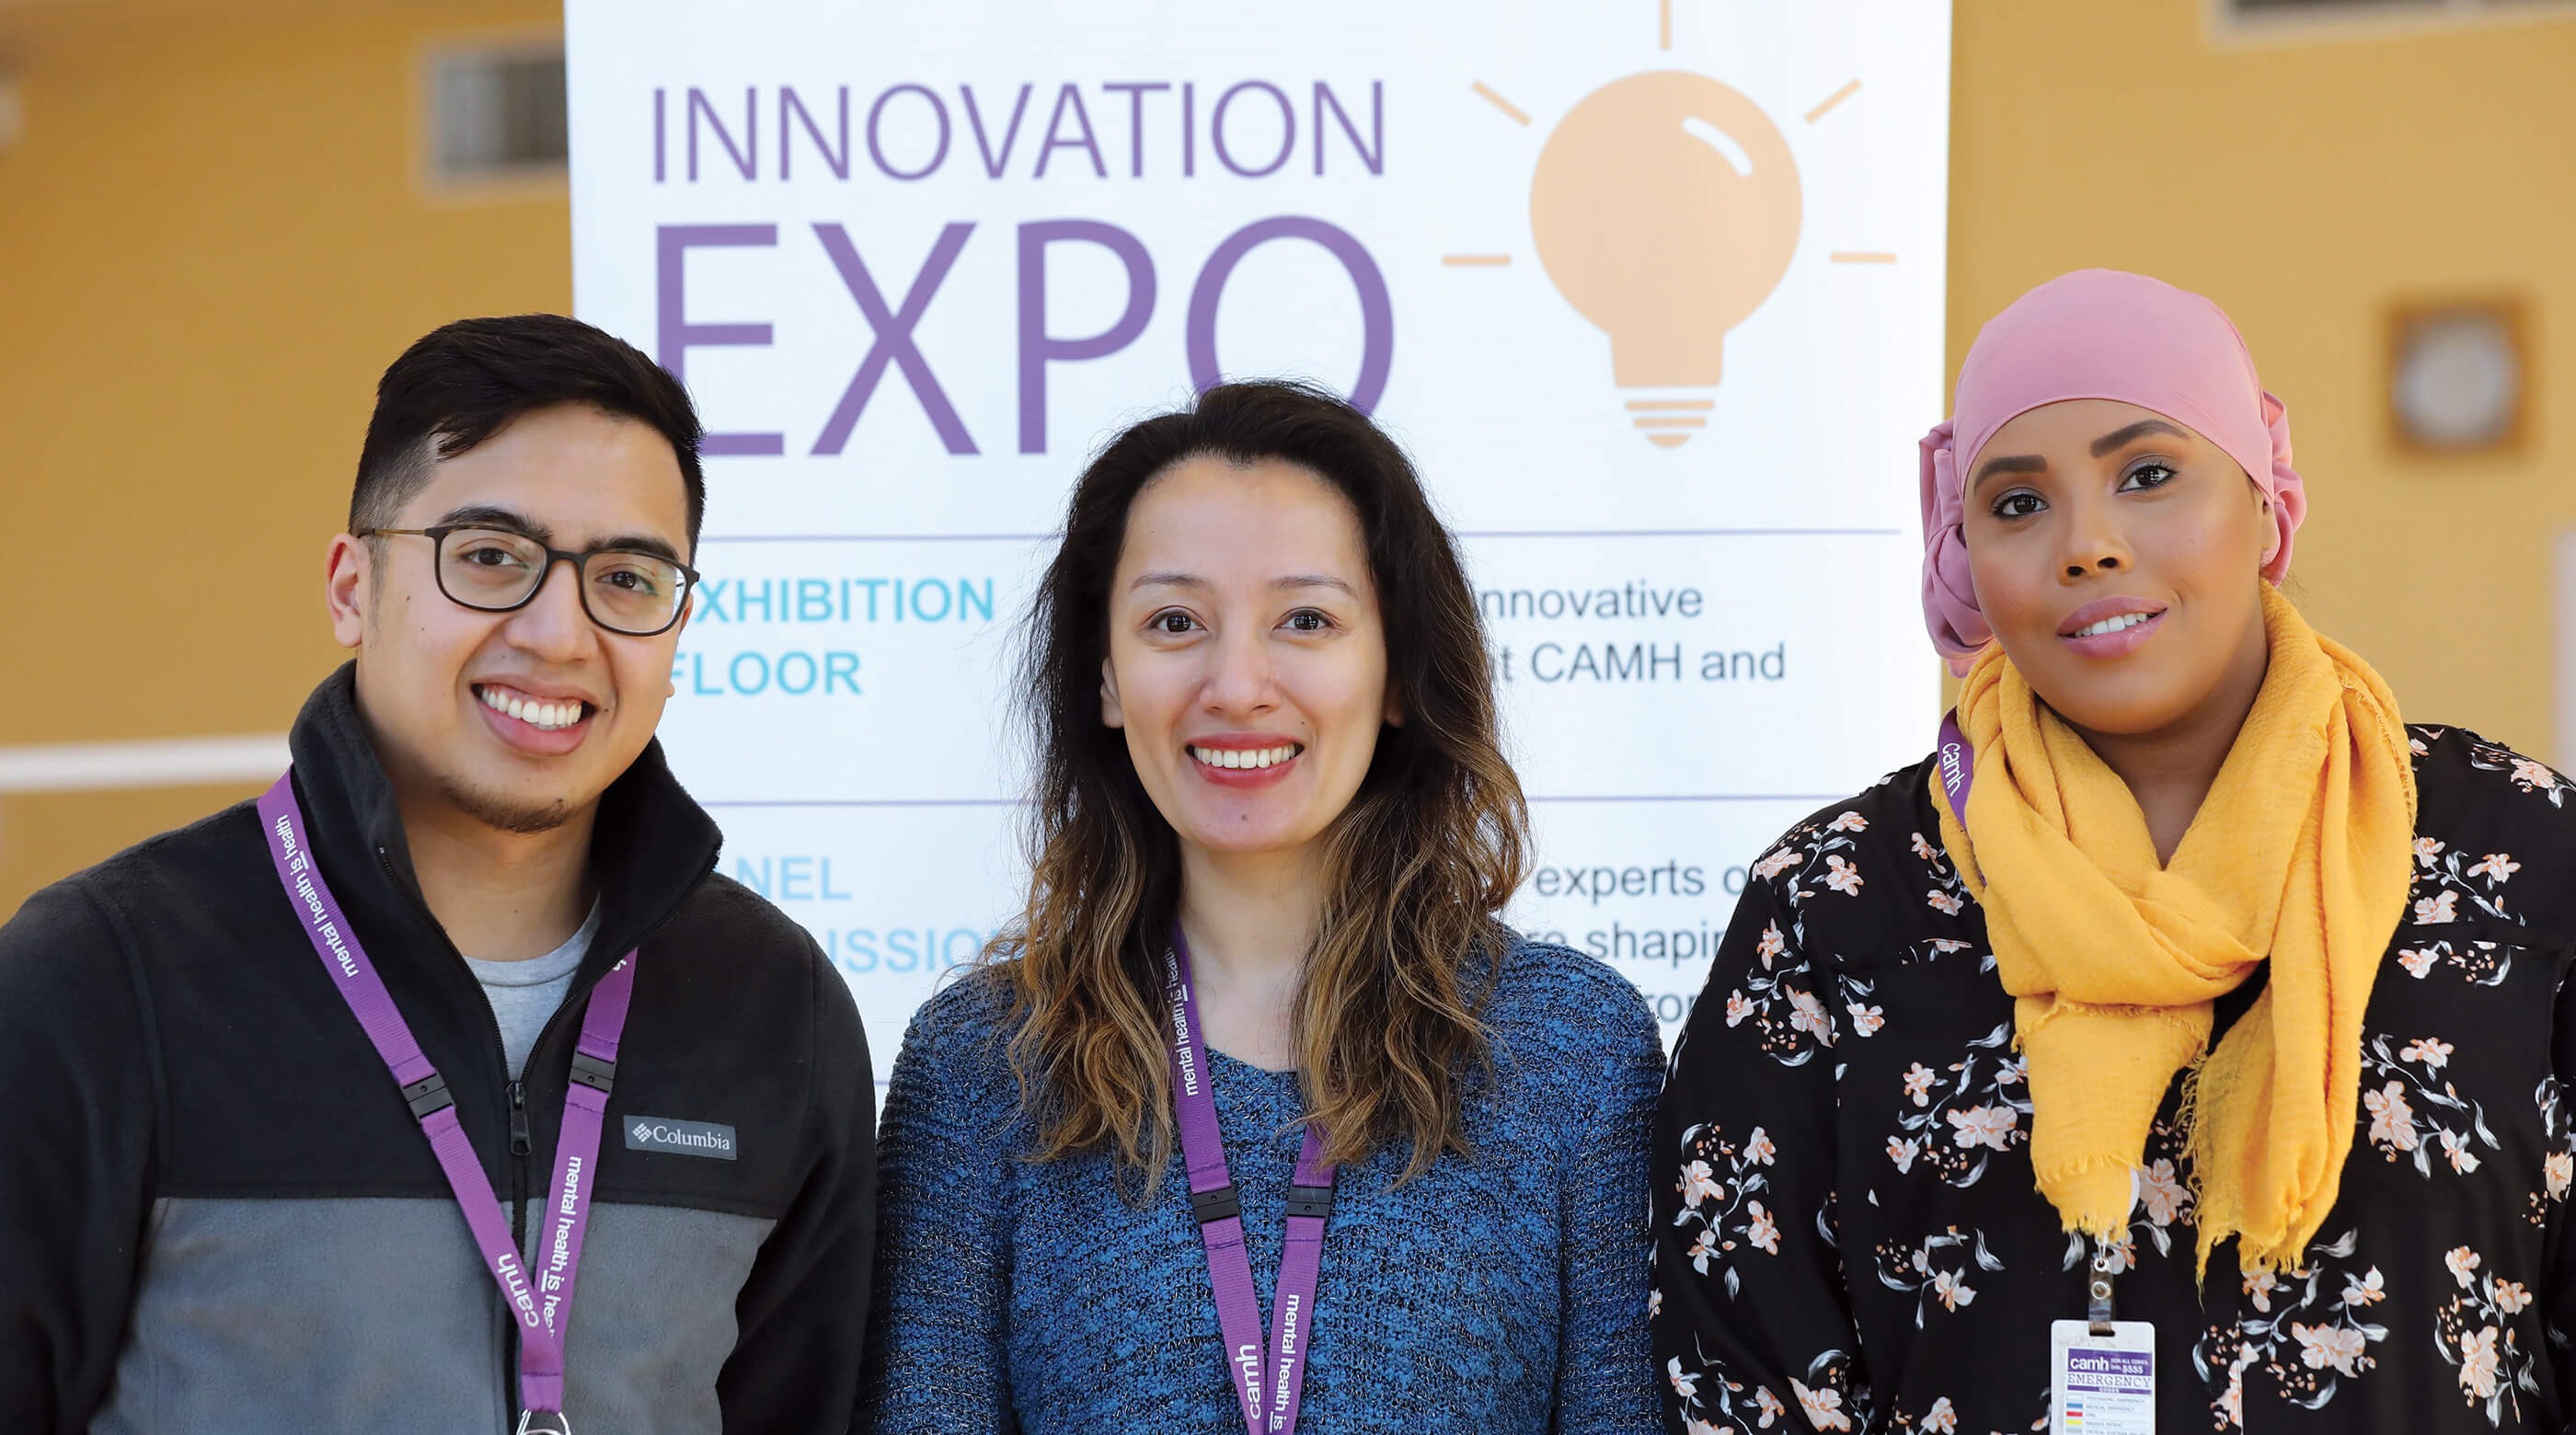 Take My Photo Day team from CAMH Innovation Expo.